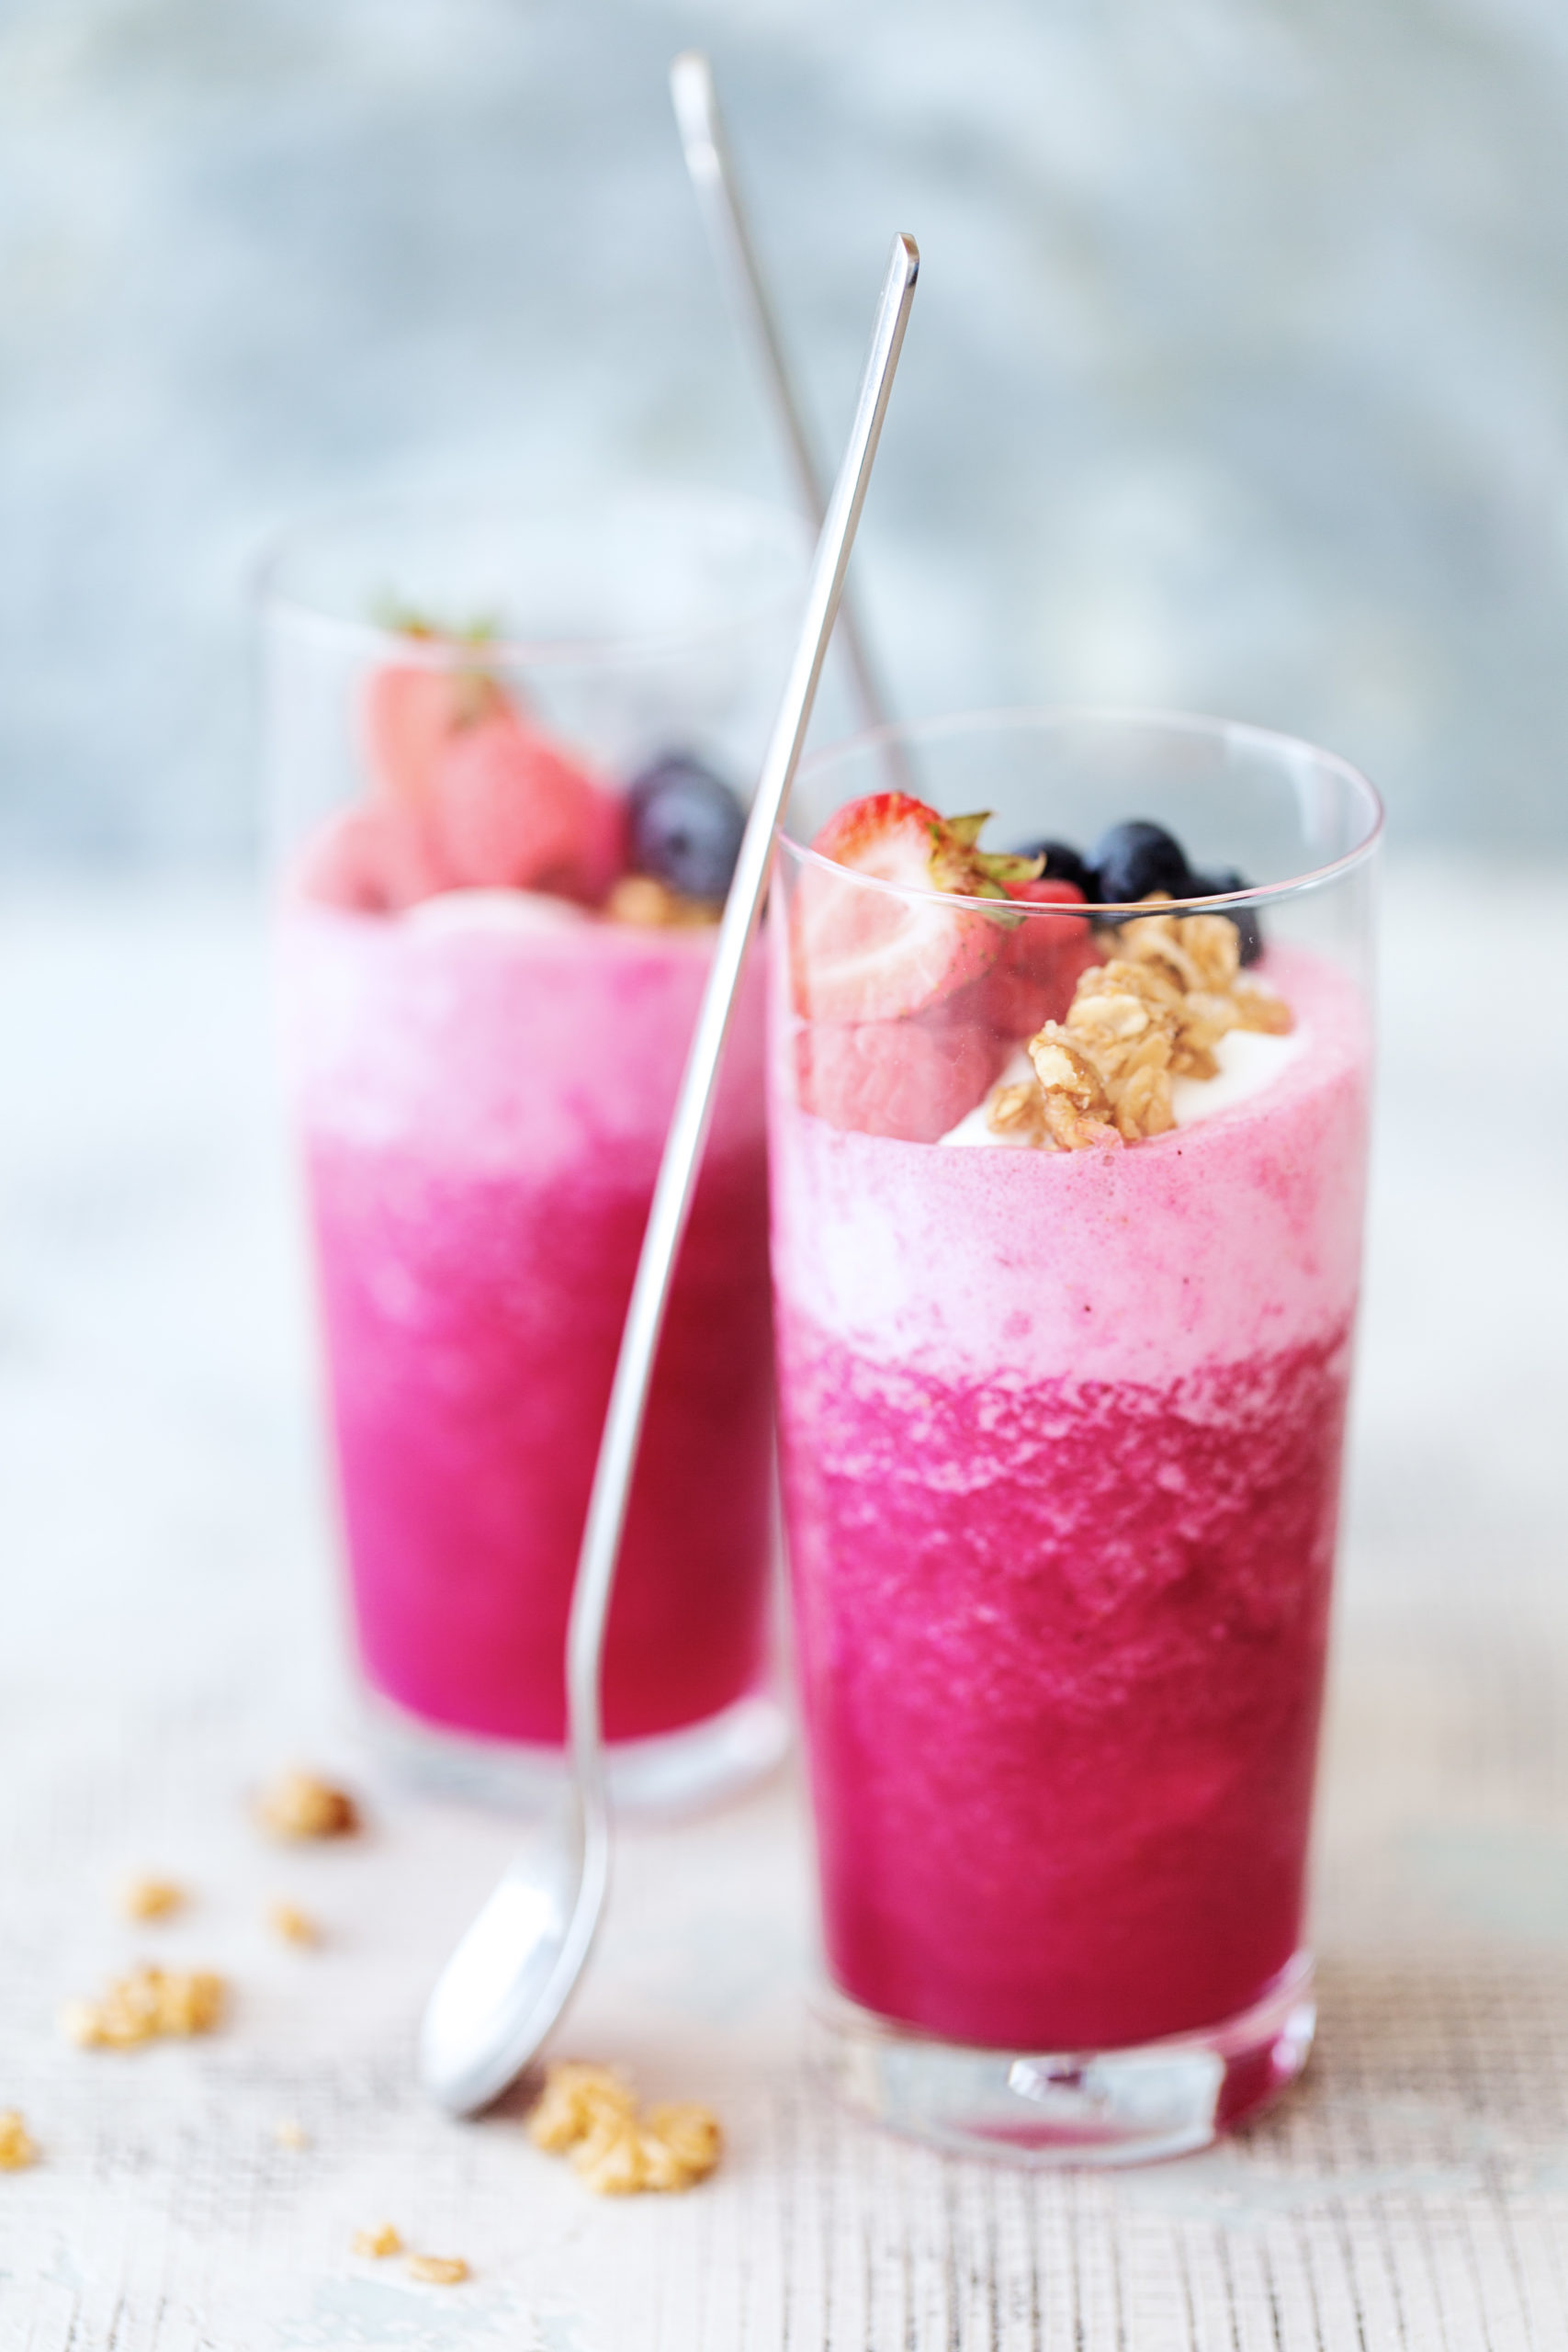 Dragon Fruit Smoothie ~ This vibrant and healthy smoothie works great as a breakfast option or as snack for any time of the day.